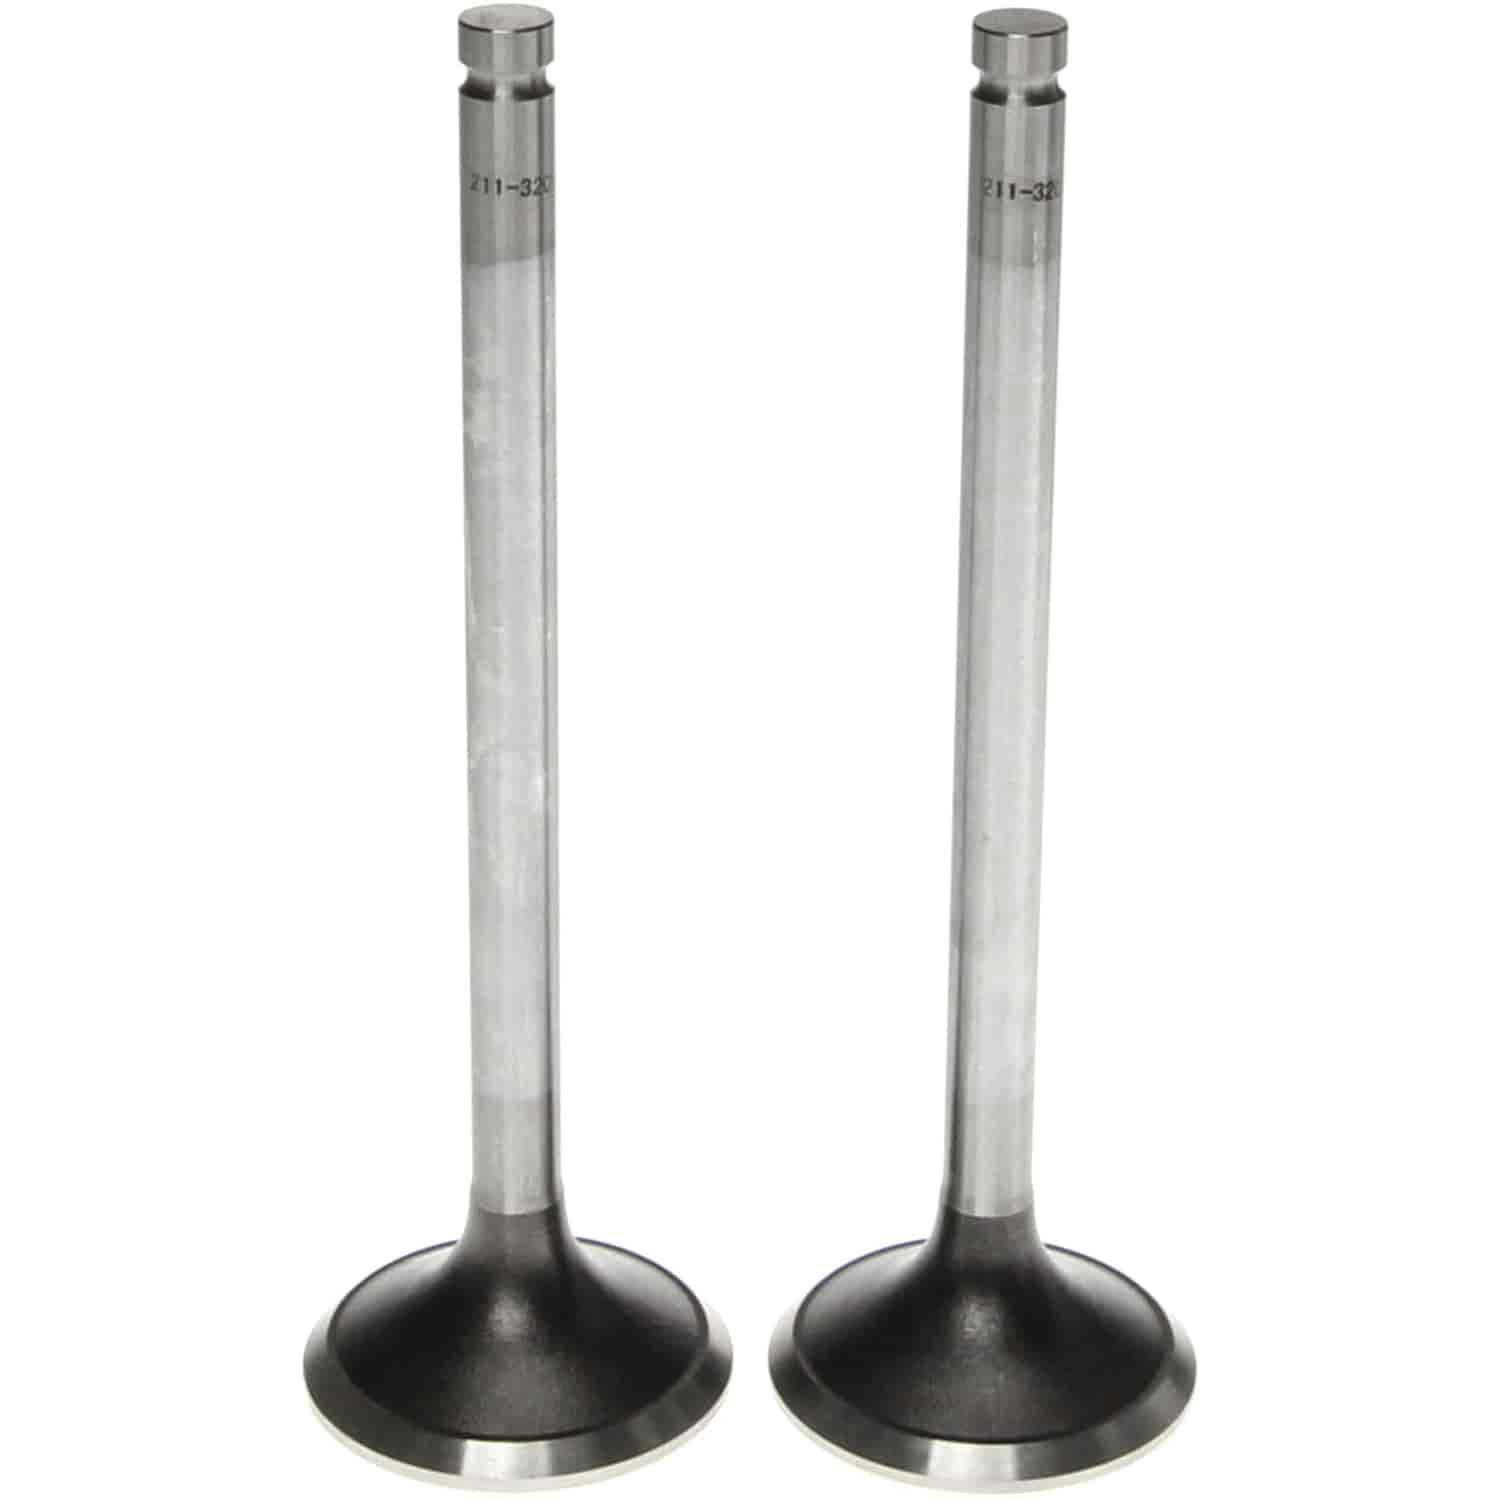 Exhaust Valve for Cummins 6C8.3 Eng. Series 6C - Bore 4.490 /114.05mm Case & Case IH Tracto